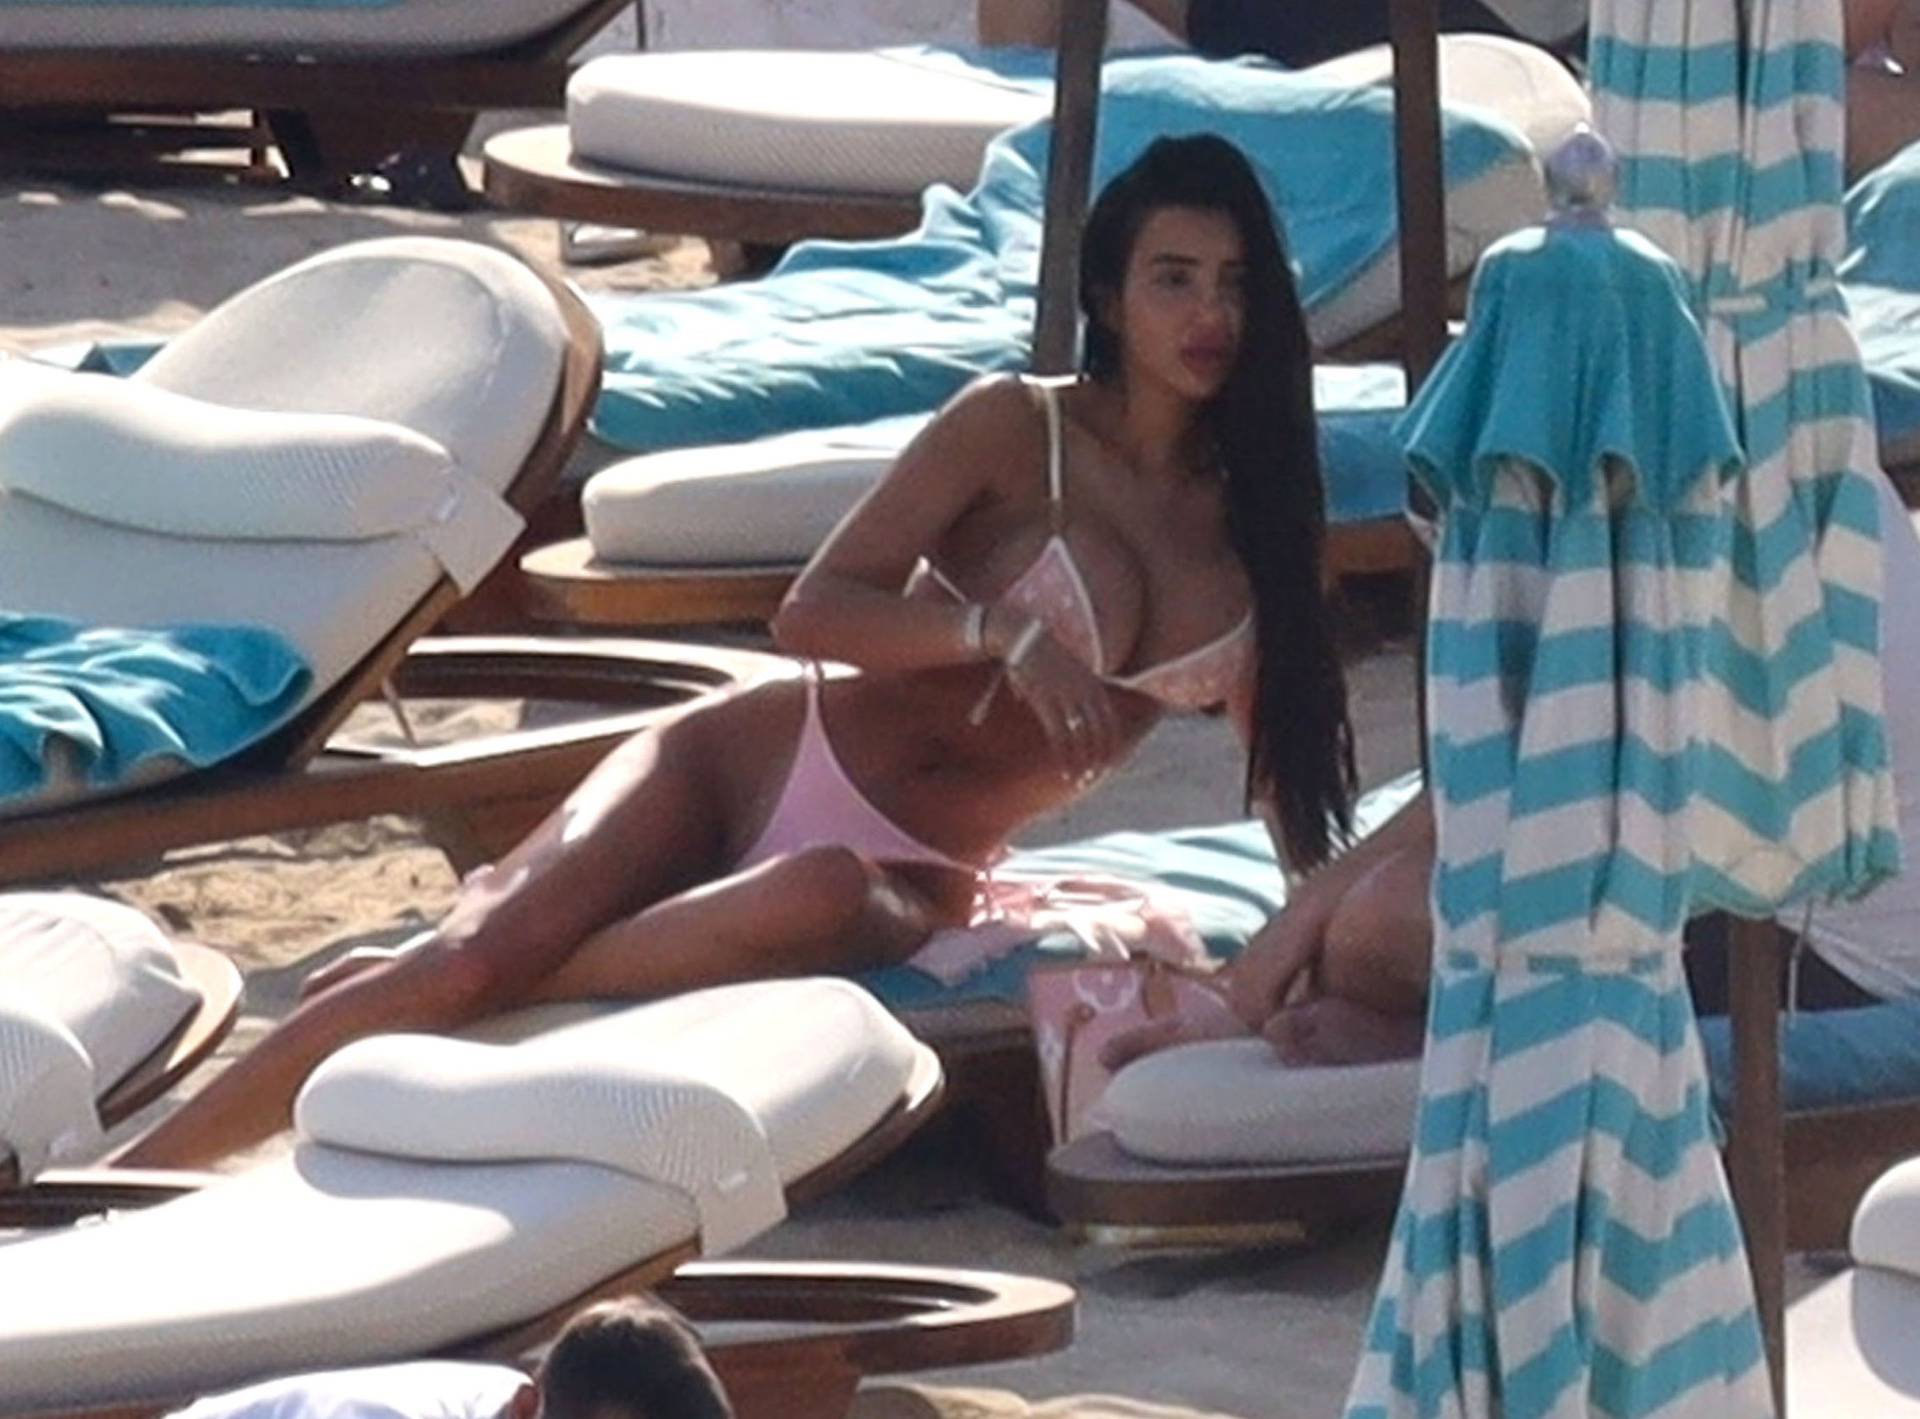 *EXCLUSIVE* the British Glamour Model Chloe Khan puts on a busty display in a tiny pink bikini with a flirty display with a mystery man on holiday in Mykonos.